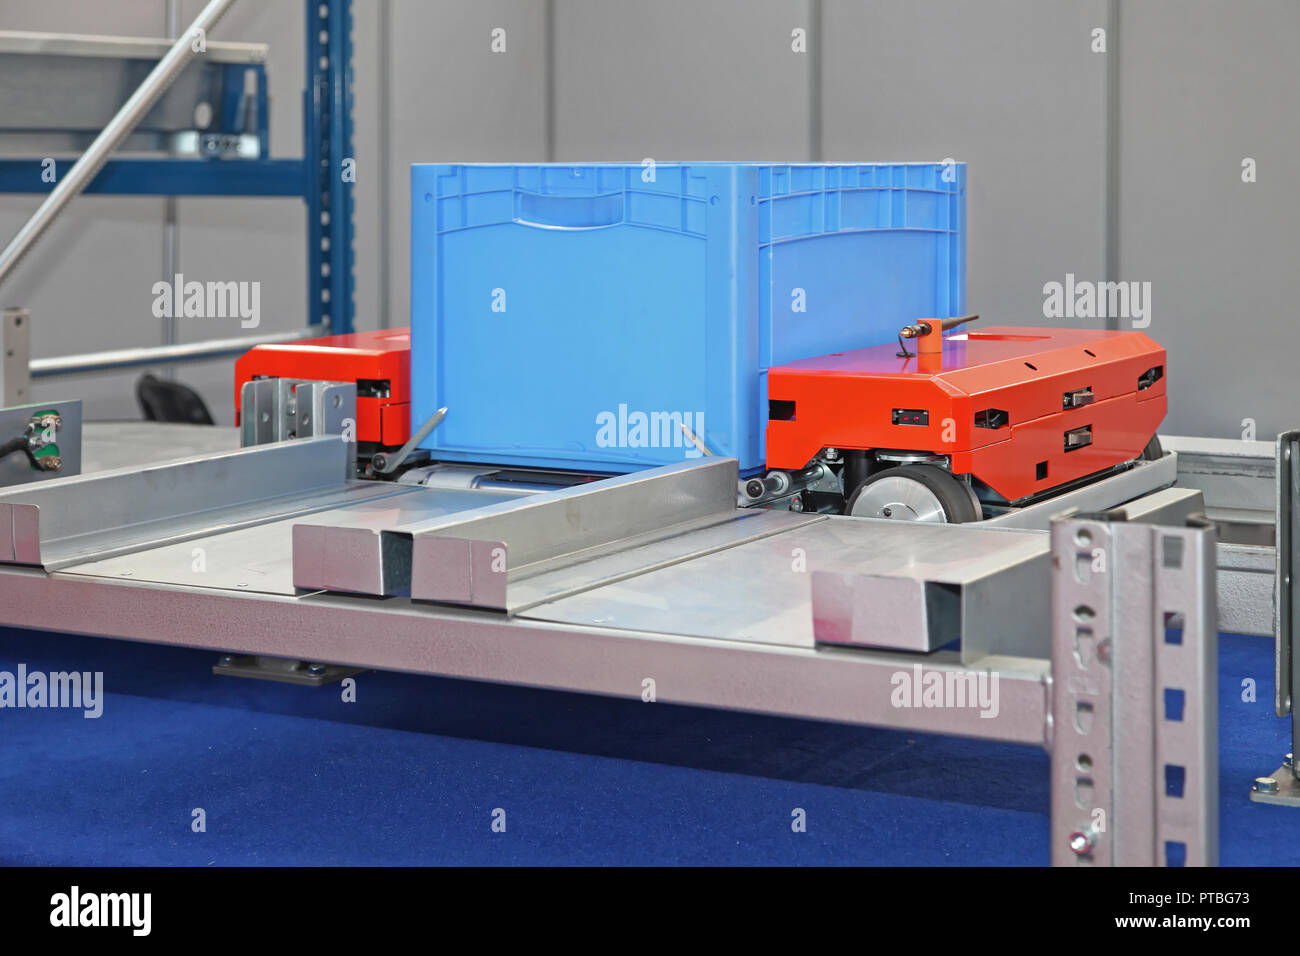 Automated Pallet Shuttle For Crat Transport at Shelves in Warehouse Stock Photo